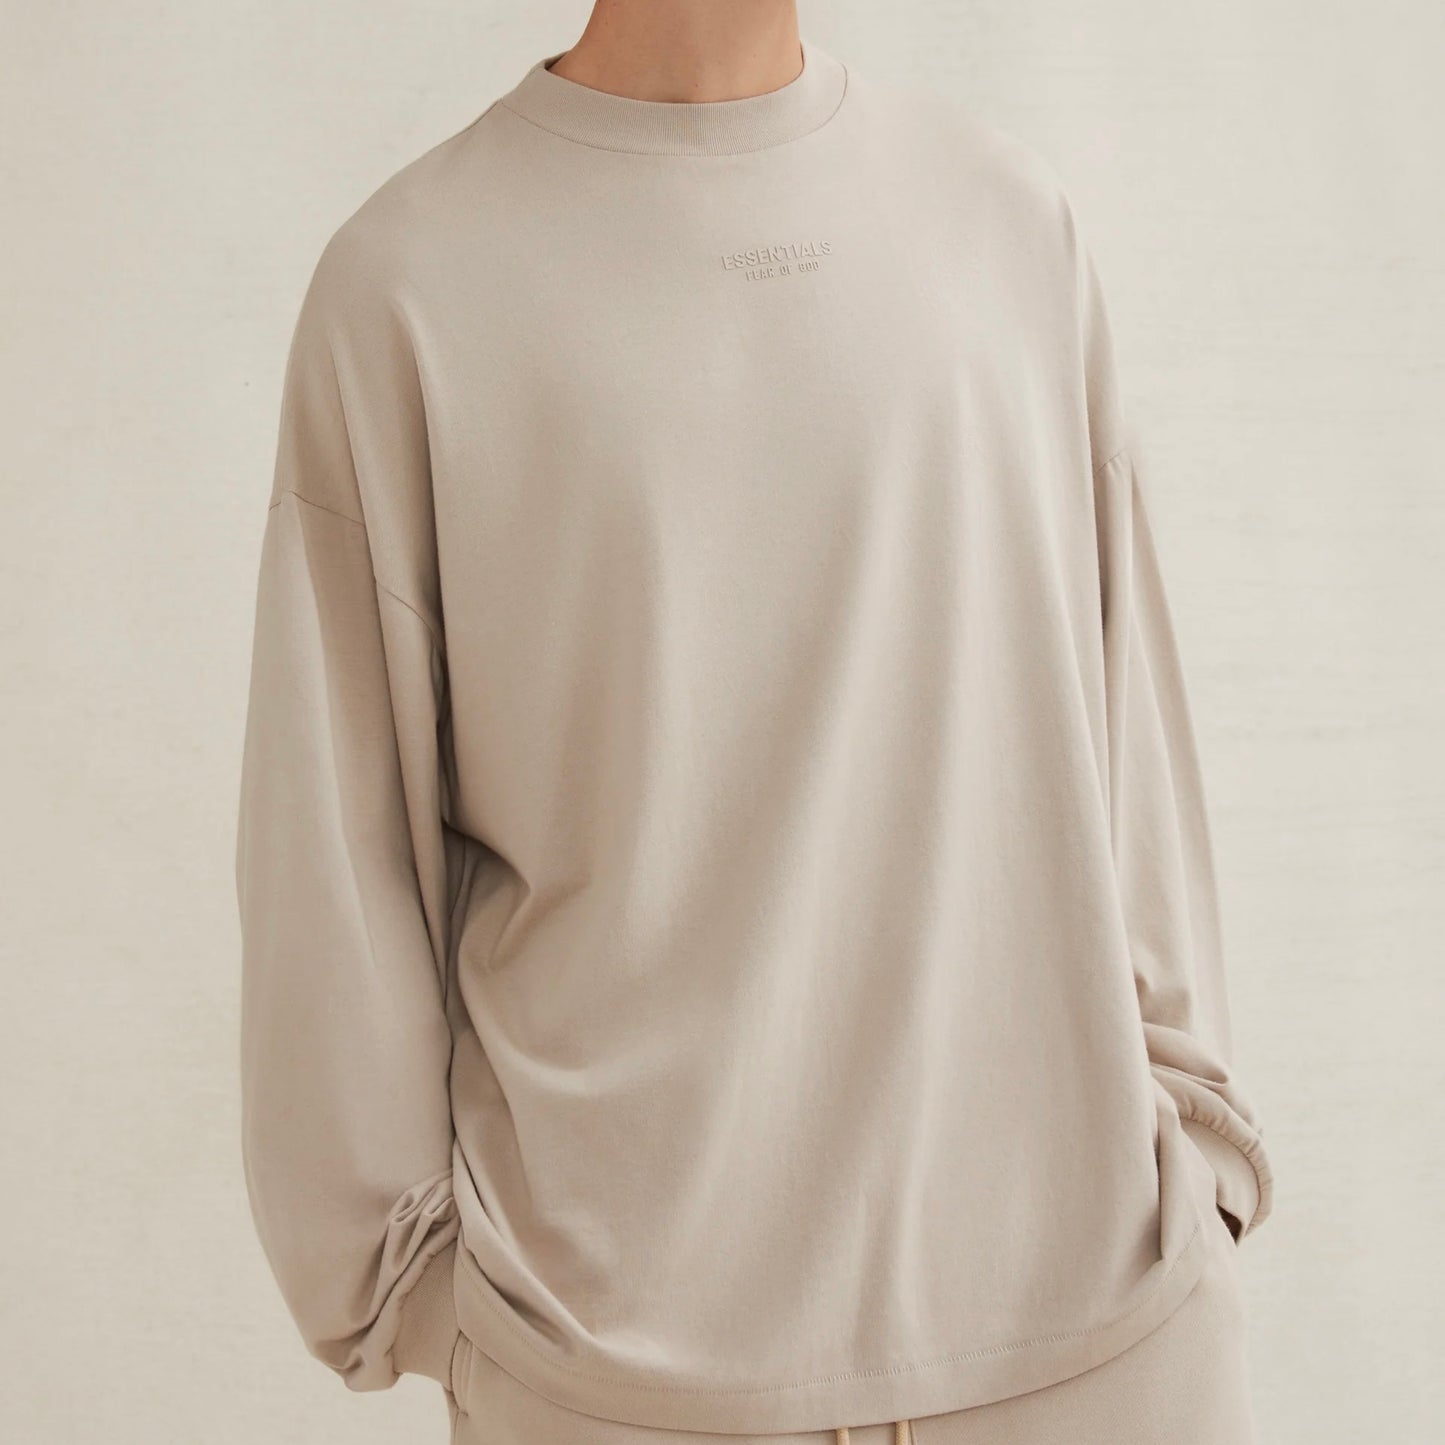 Fear of God Essentials Silver Cloud Long Sleeve On Body View